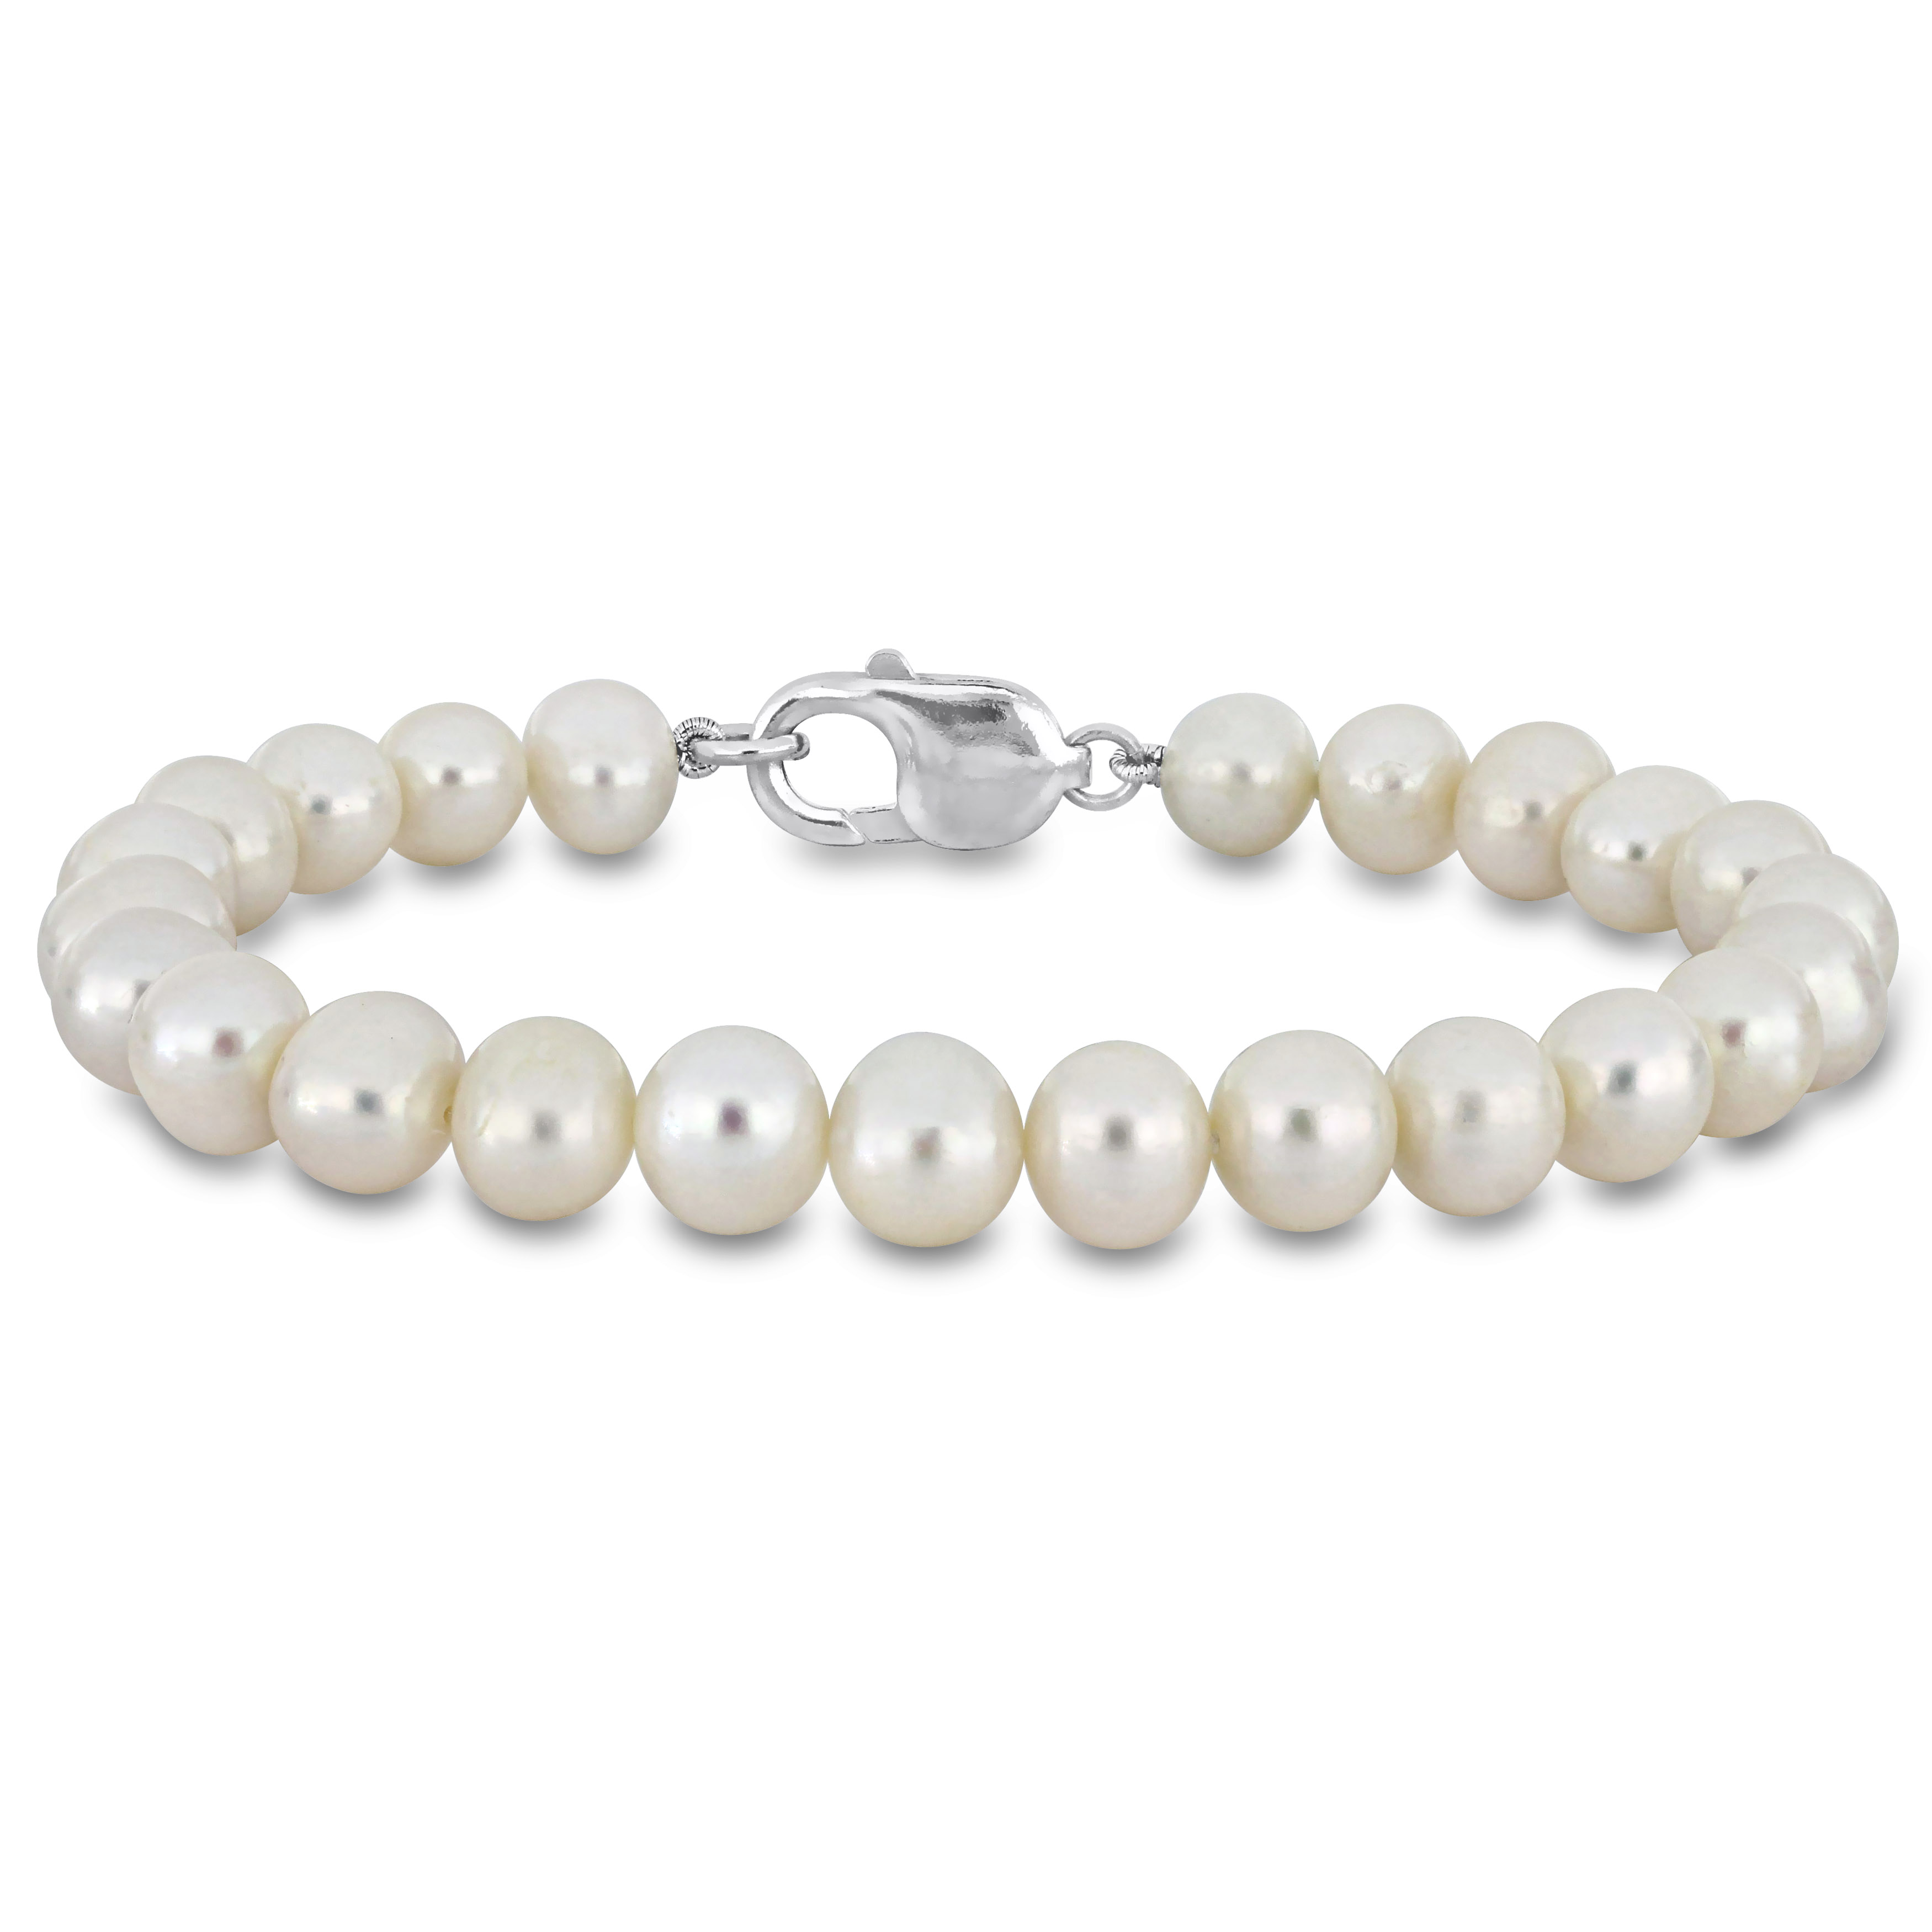 9-9.5mm Men's Freshwater Cultured Pearl Bracelet with Sterling Silver Lobster Clasp - 9 in.